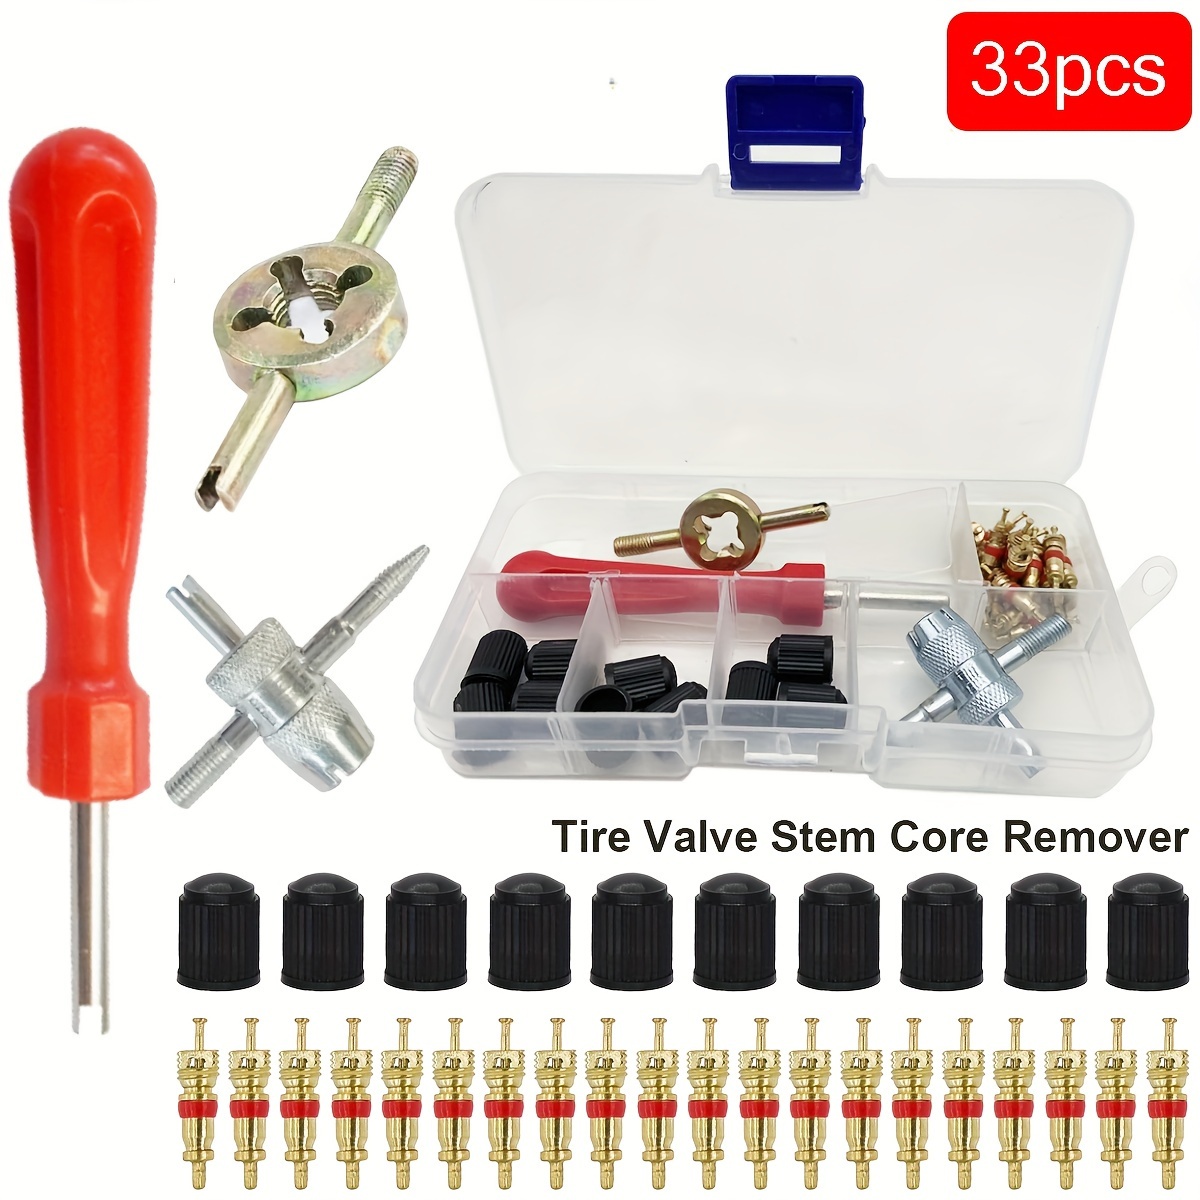 

33pcs Car Bicycle Slotted Handle Tire Valve Stem Core Remover Screwdriver Tire Repair Install Tool Kit, Auto Motorcycle Accessories